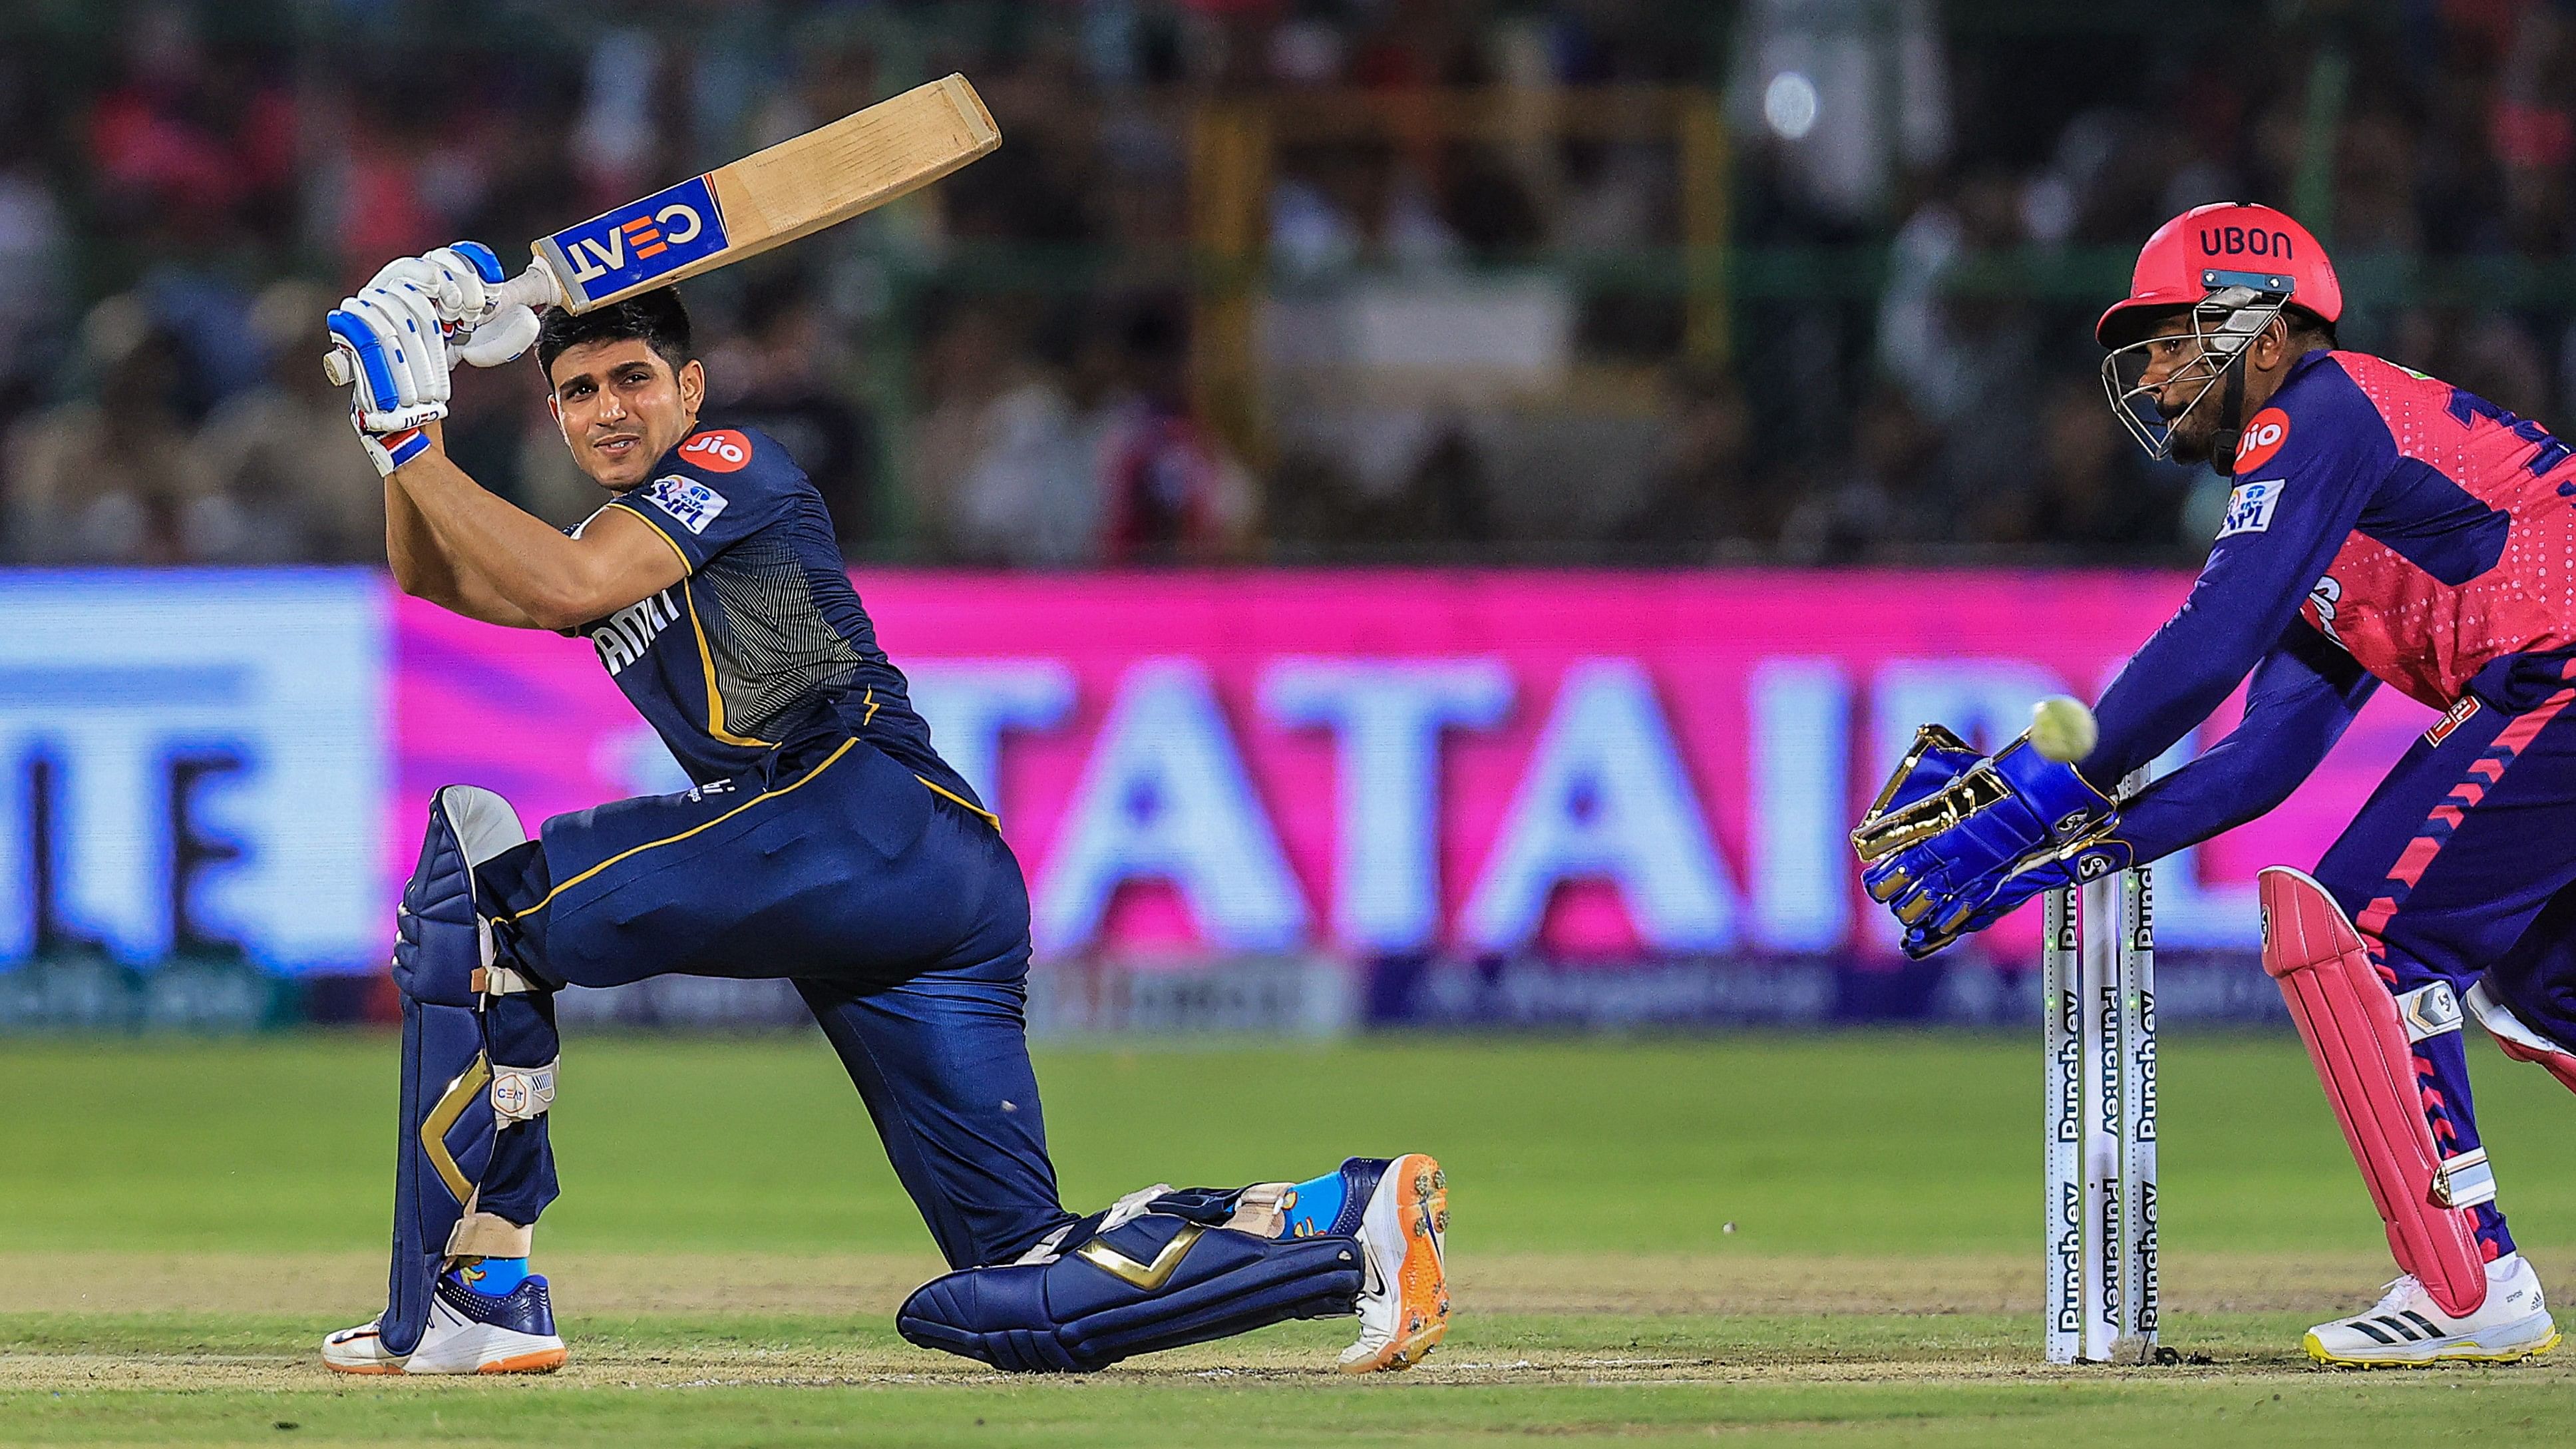 <div class="paragraphs"><p>ujarat Titans' captain Shubman Gill plays a shot during the Indian Premier League (IPL) T20 cricket match between Rajasthan Royals and Gujarat Titans at Sawai Mansingh Stadium, in Jaipur, on Wednesday</p></div>